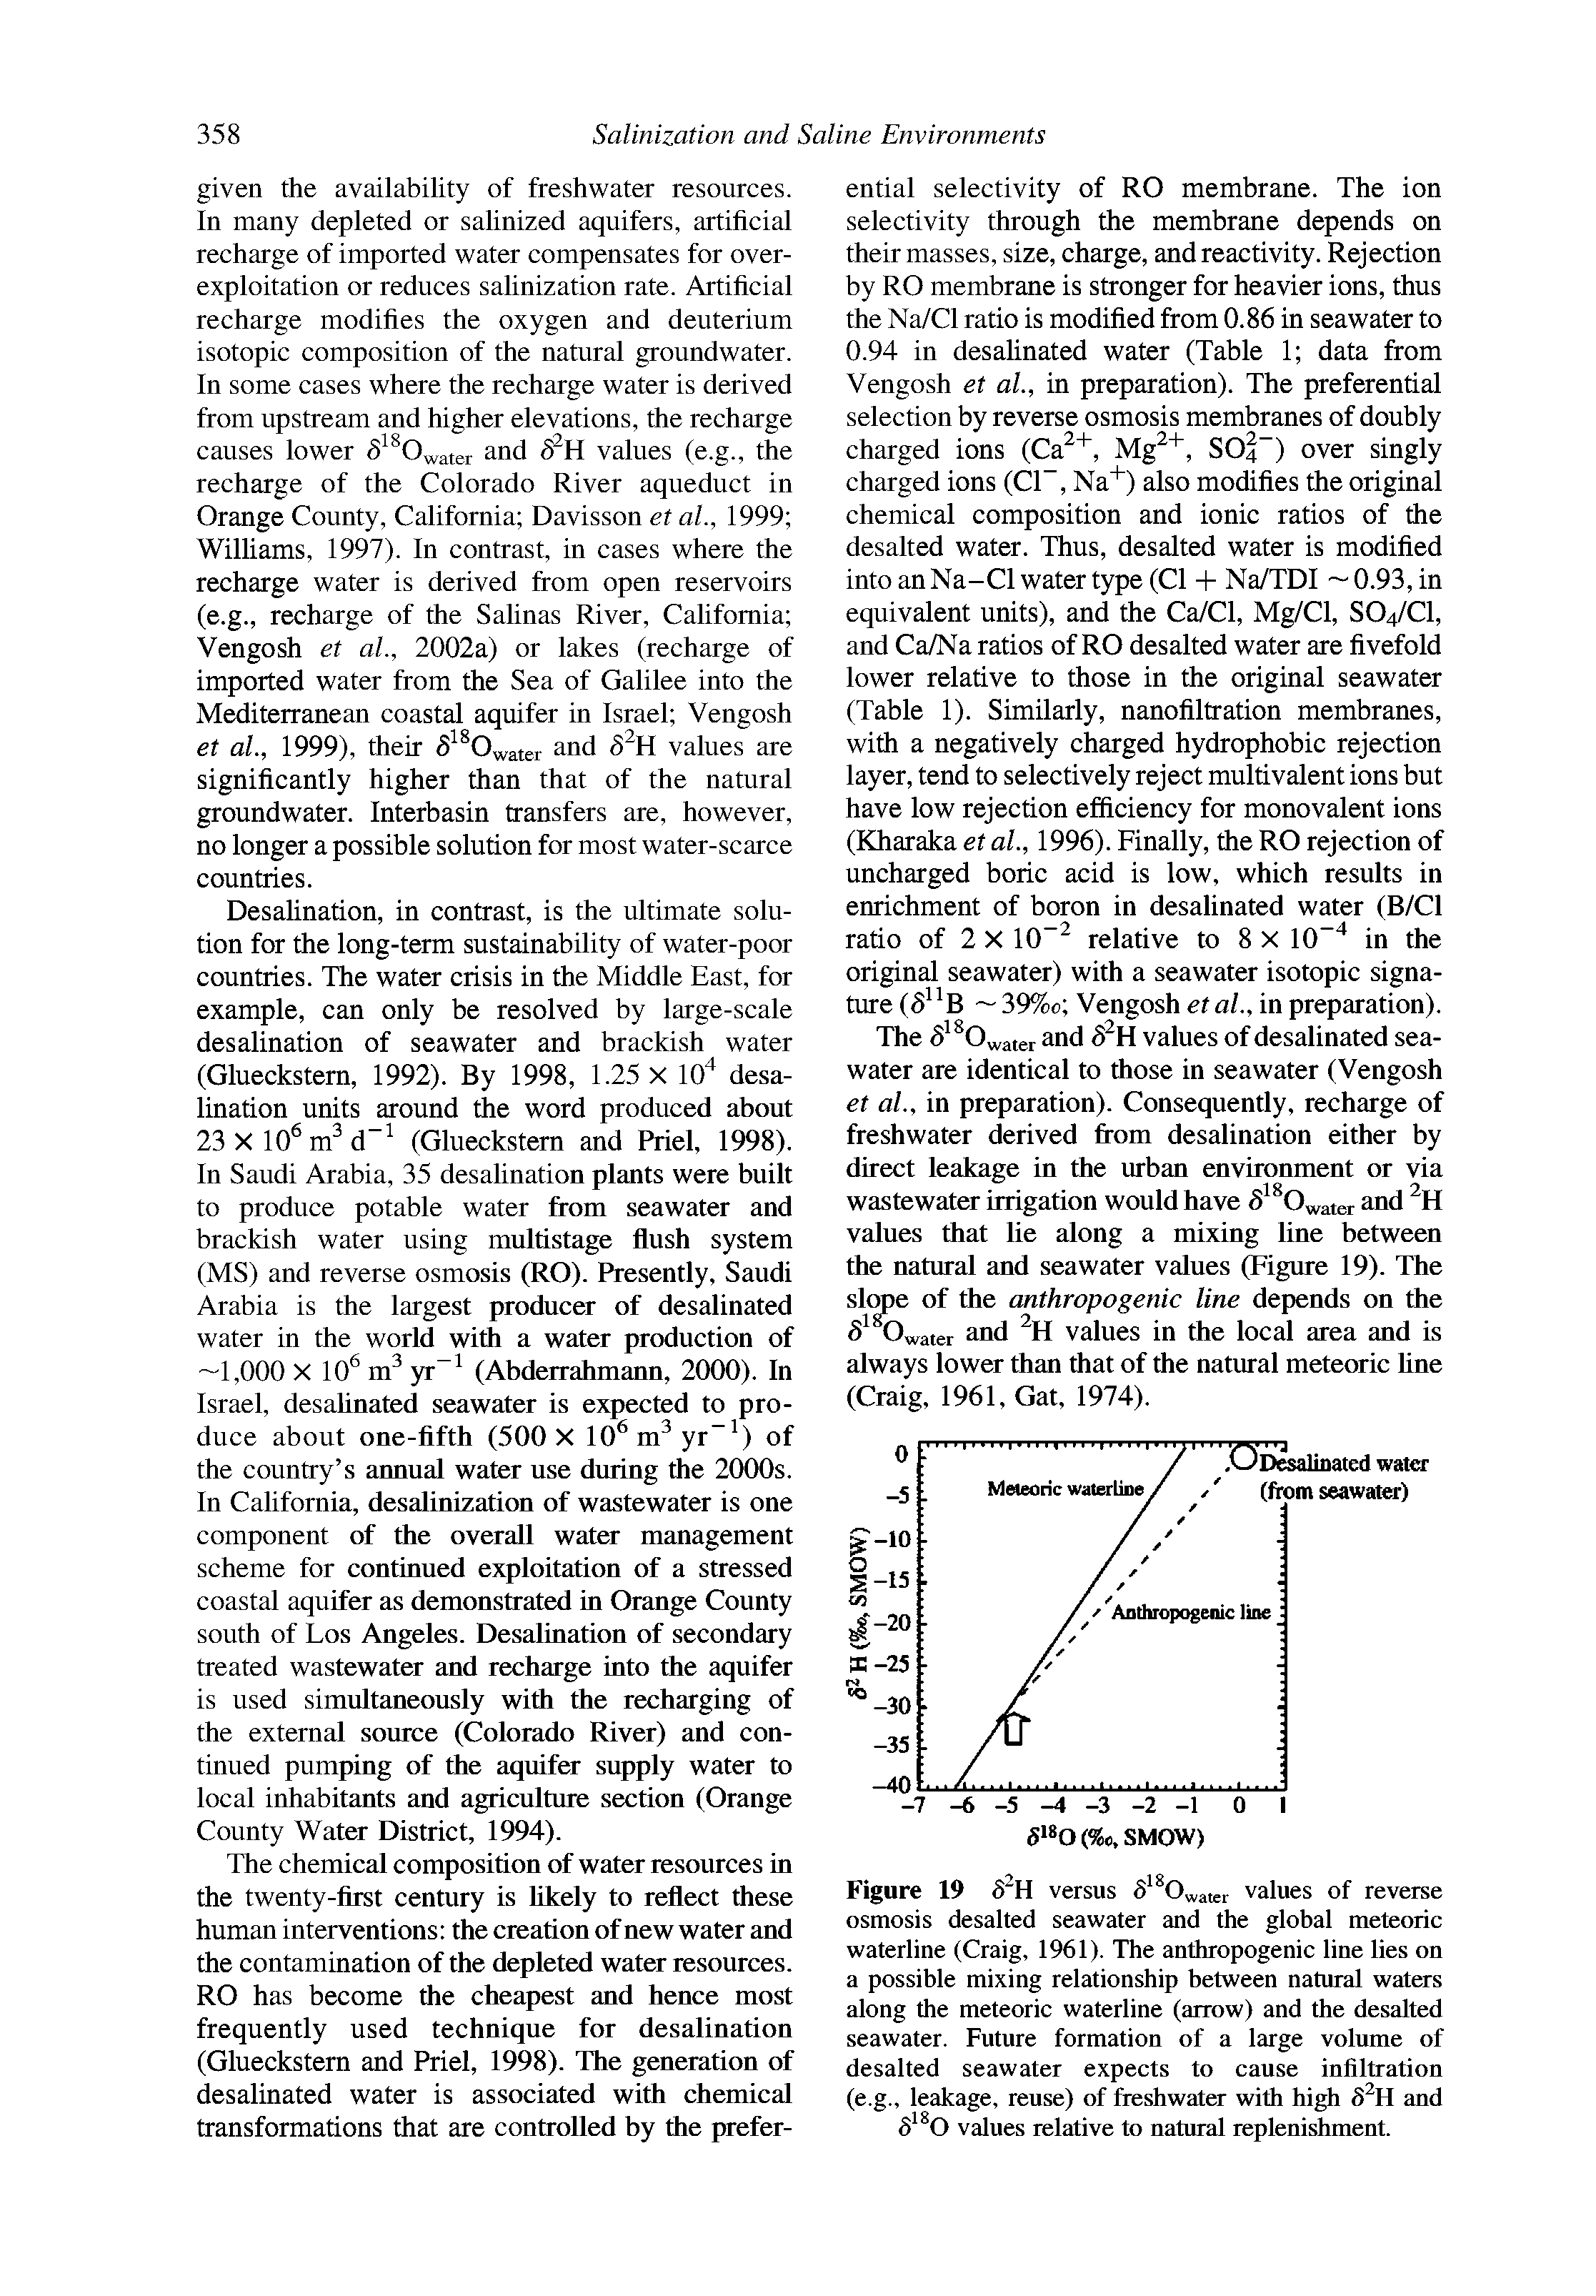 Figure 19 6 H versus 6 0 aKr values of reverse osmosis desalted seawater and the global meteoric waterline (Craig, 1961). The anthropogenic line lies on a possible mixing relationship between natural waters along the meteoric waterline (arrow) and the desalted seawater. Future formation of a large volume of desalted seawater expects to cause infiltration (e.g., leakage, reuse) of freshwater with high S H and 6 0 values relative to natural replenishment.